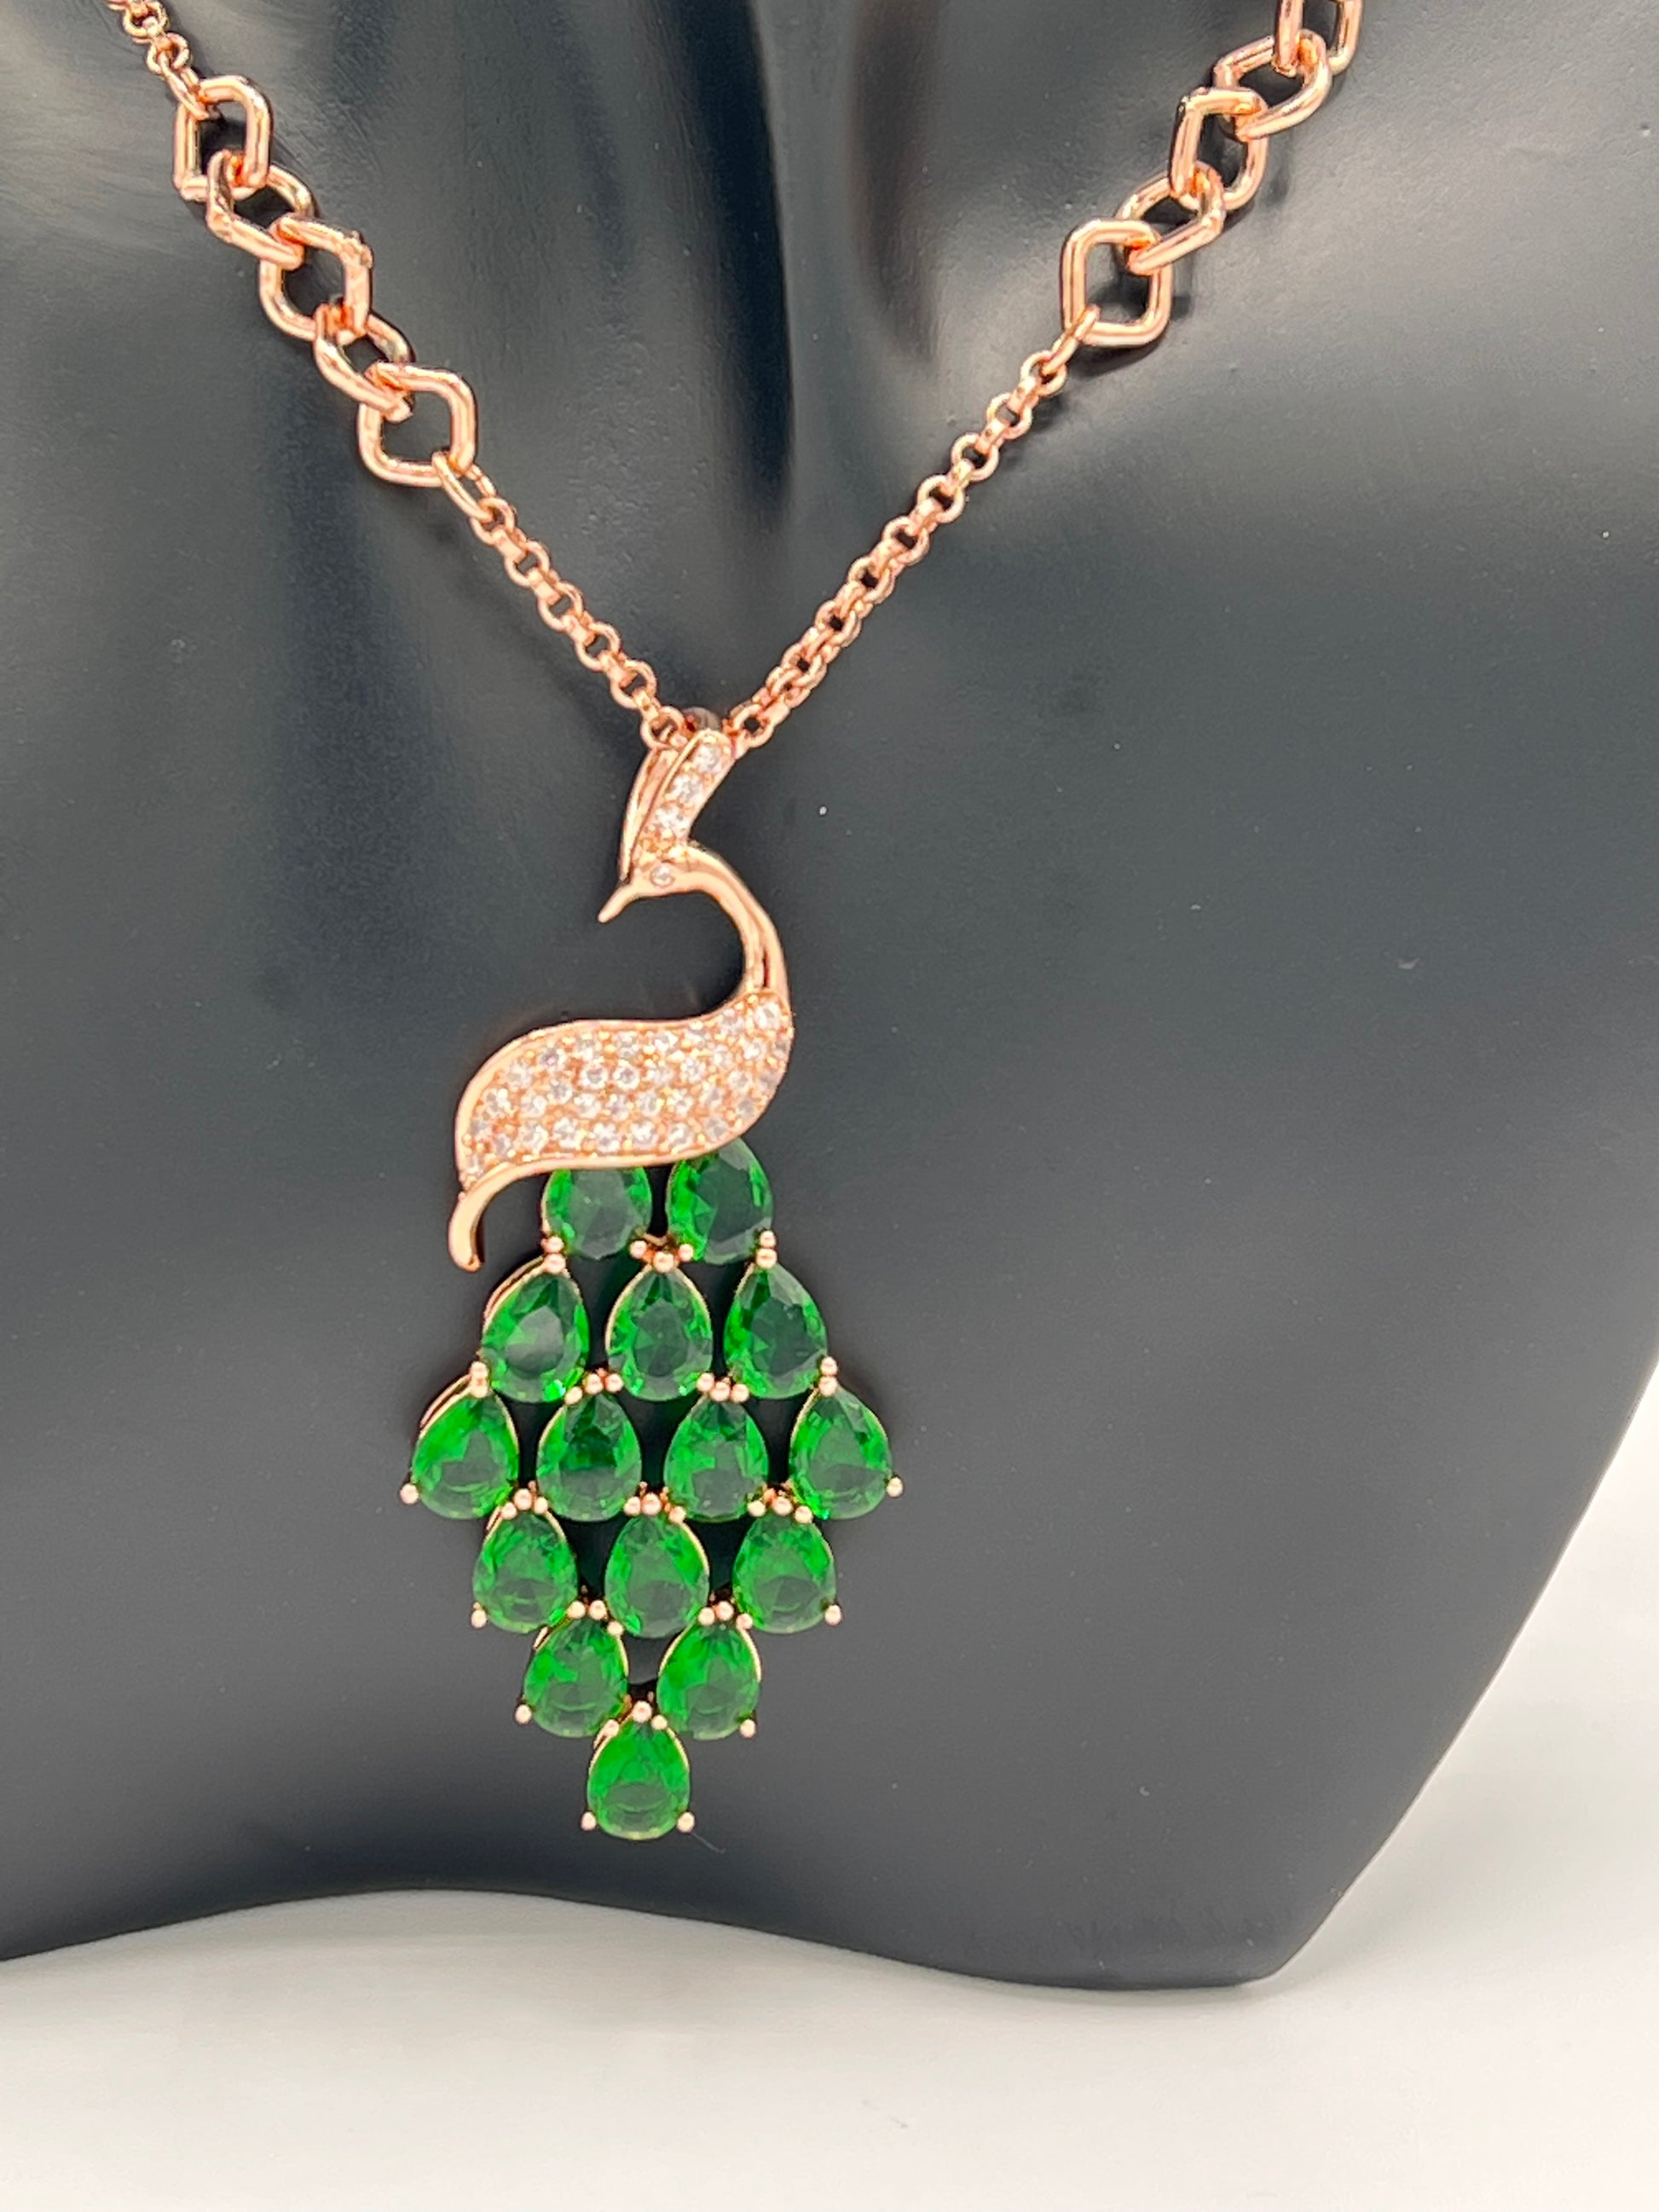 rose gold 70cm chain with peacock design  pendant. the peacock body is embellished with with cubic zircons and the feathers are made of big tear shaped green cubic zircons the link chain has small and big links which give this chain a unique look .